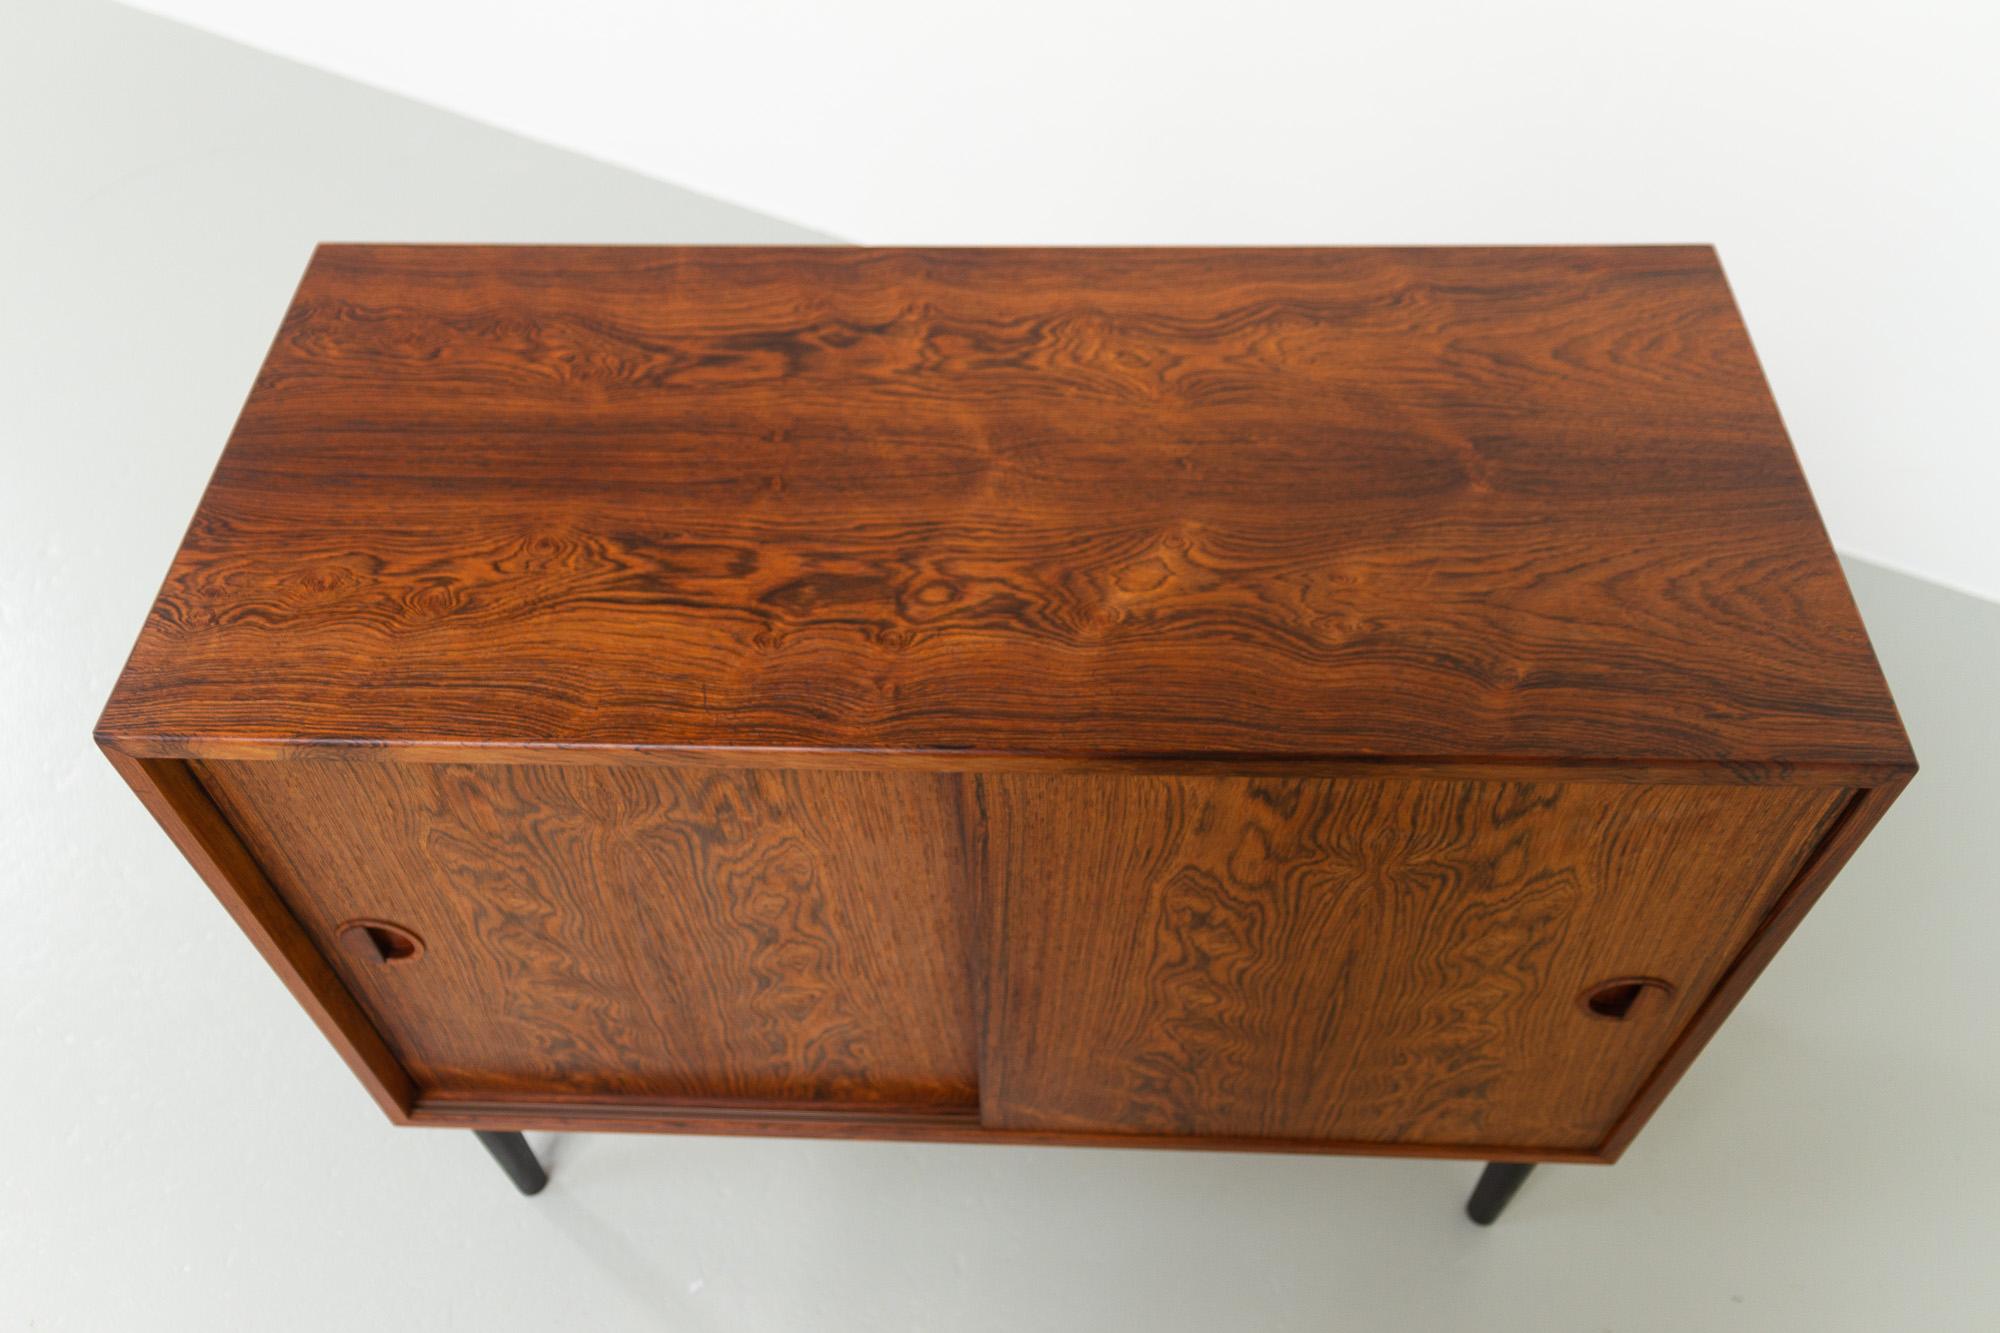 Vintage Danish Rosewood Sideboard with Sliding Doors by HG Furniture, 1960s.
Designed by Rud Thygesen og Johnny Sørensen for Hansen & Guldborg, Denmark.
This small mid-century modern Rosewood sideboard is part of the HG Wall unit system. The